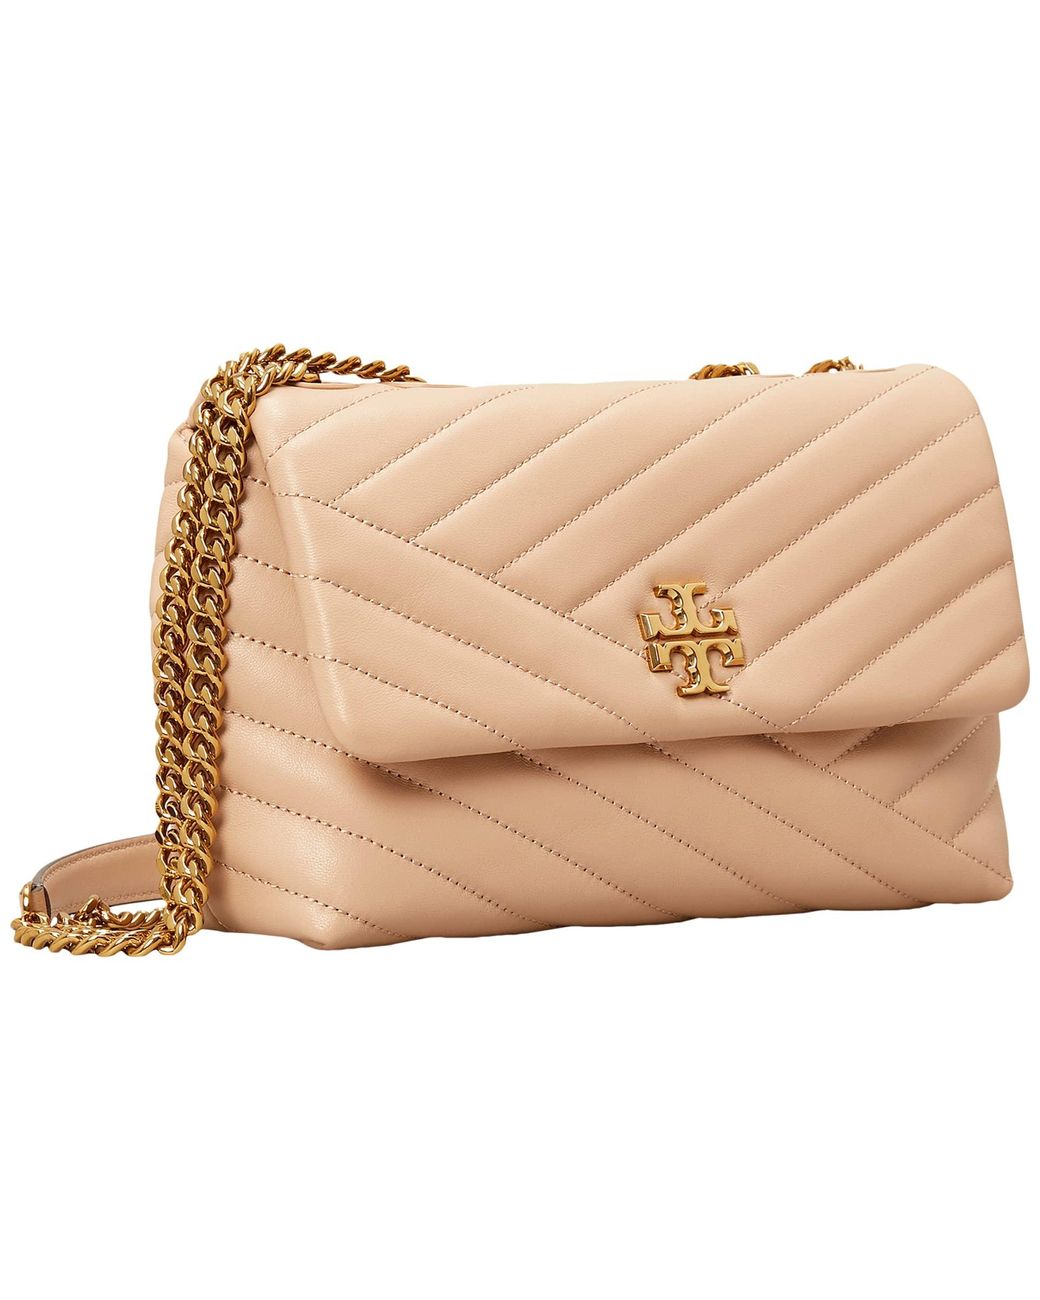 Tory Burch Kira Chevron Convertible Leather Small Bag in Natural